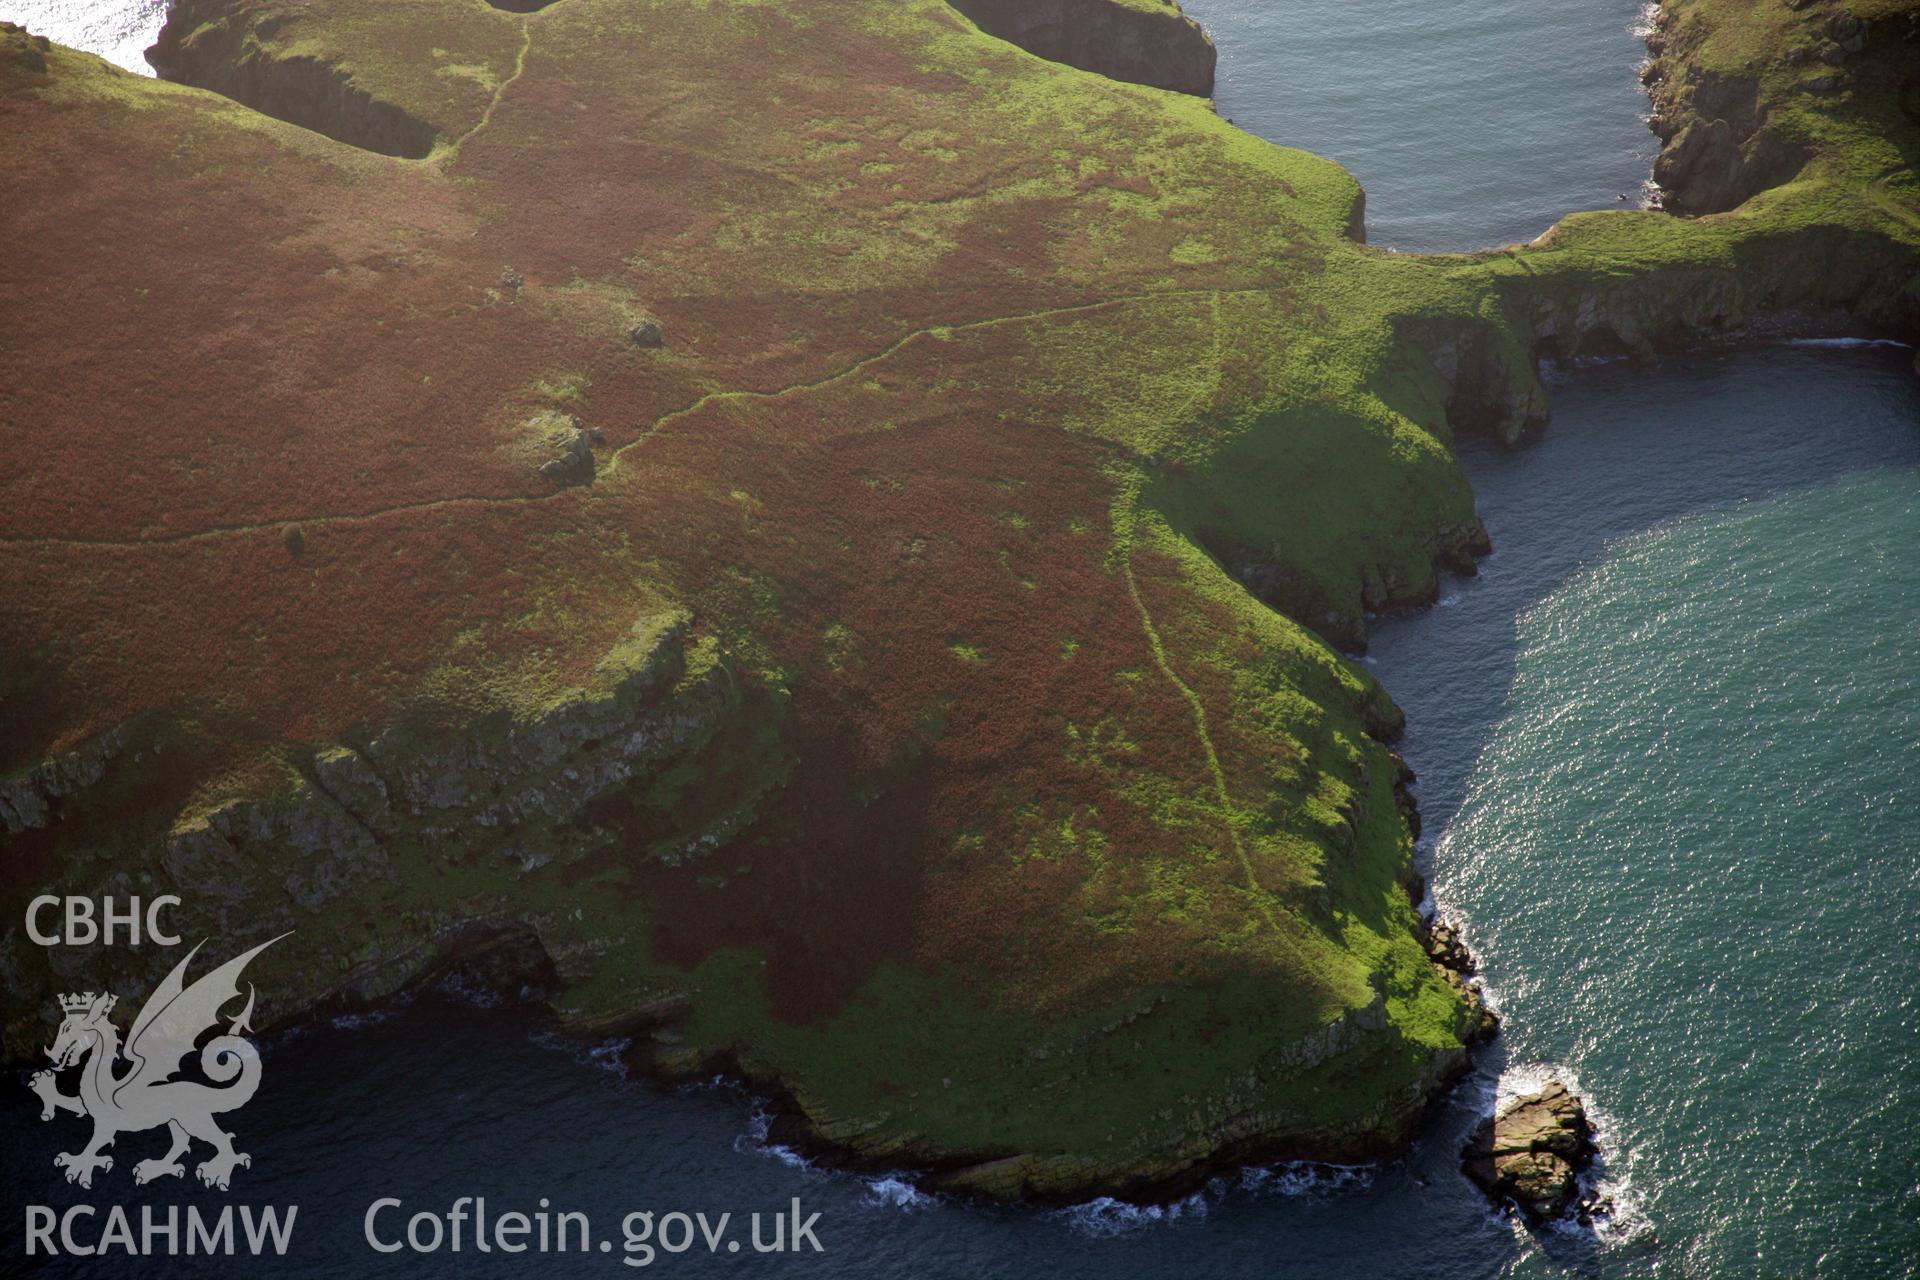 RCAHMW colour oblique photograph of The Neck, Skomer Island. Taken by O. Davies & T. Driver on 22/11/2013.